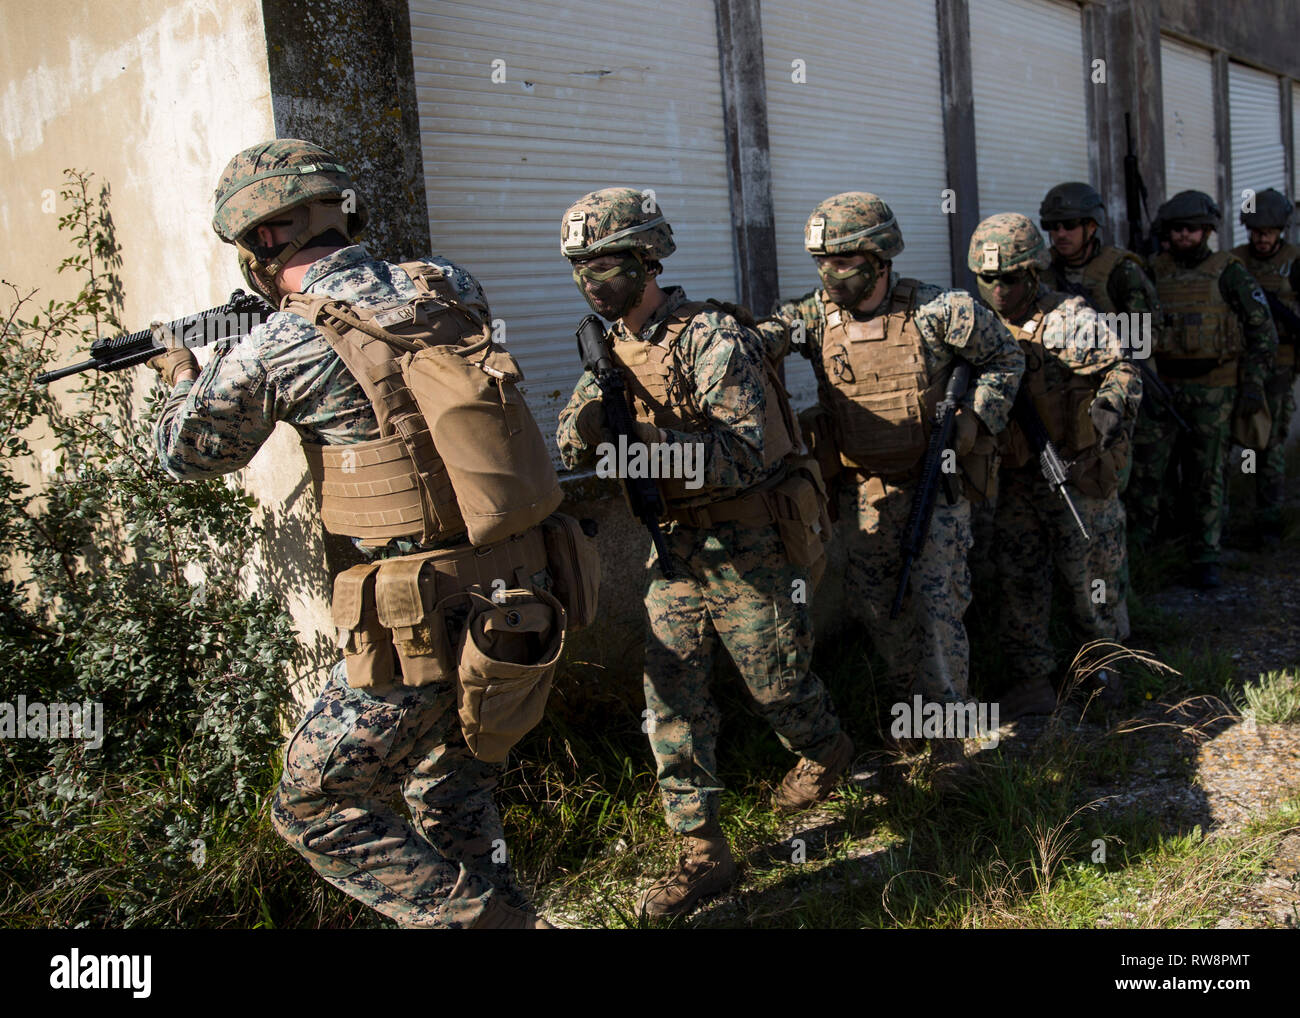 U.S. Marines with Special Purpose Marine Air-Ground Task Force-Crisis Response-Africa 19.1, Marine Forces Europe and Africa, prepare to clear a building during a training event with Portuguese marines in Troia, Portugal, Feb. 25, 2019. SPMAGTF-CR-AF is a rotational force deployed to conduct crisis-response and theater-security operations in Europe and Africa. (U.S. Marine Corps photo by Sgt. Katelyn Hunter) Stock Photo